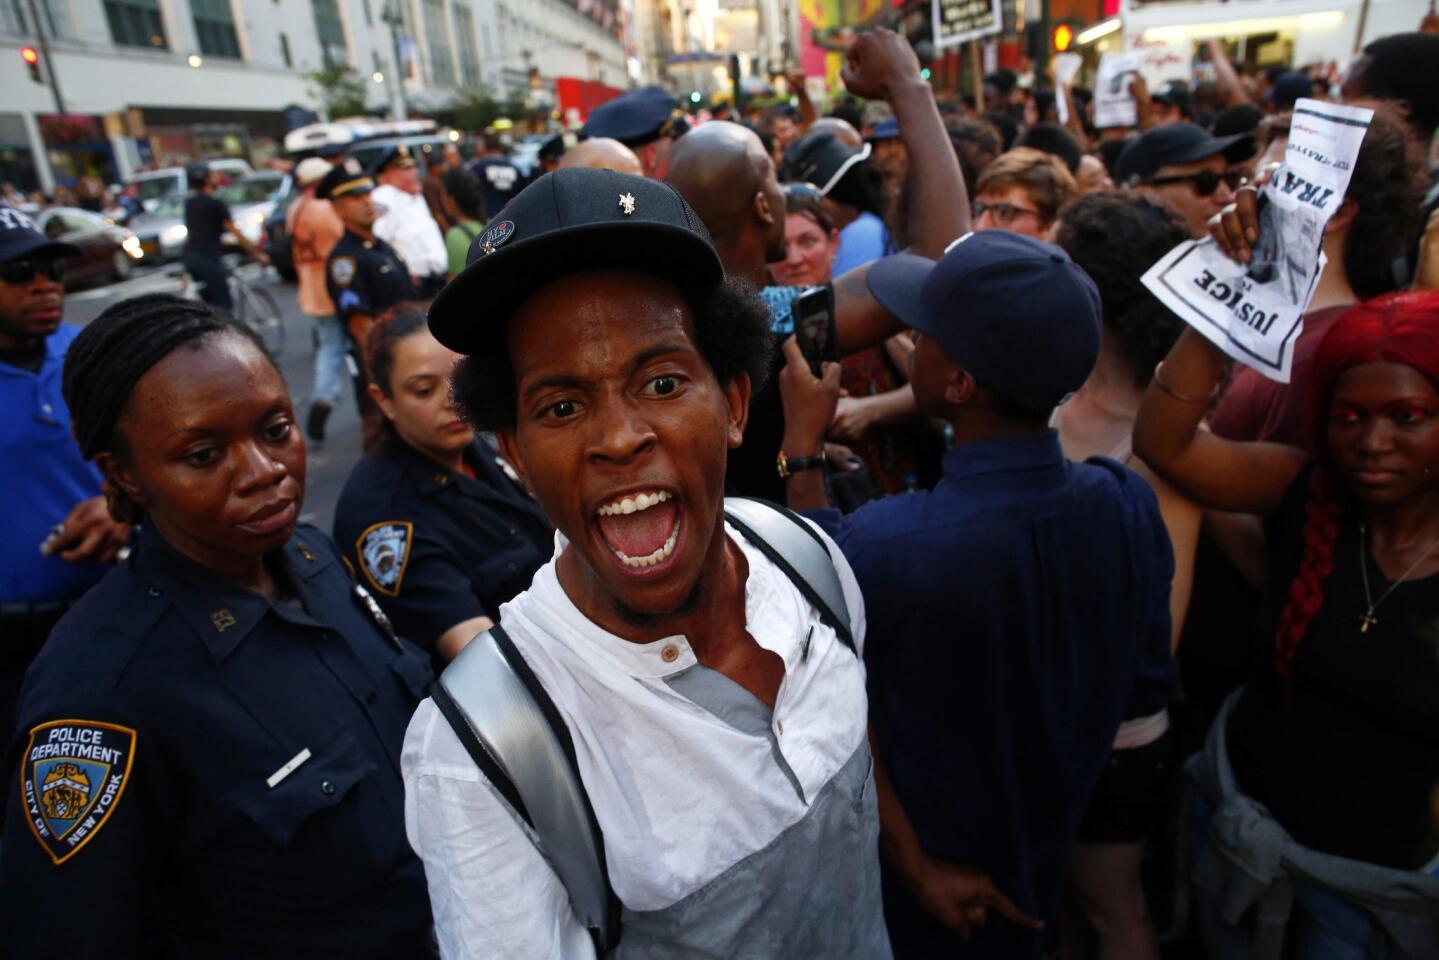 People take part in a march in reaction to the acquittal of George Zimmerman in New York July 14, 2013. Thousands of protesters chanting "No justice, no peace" gathered in New York City on Sunday to protest the acquittal of George Zimmerman in the shooting death of unarmed black teenager Trayvon Martin, which prompted rallies across the country.